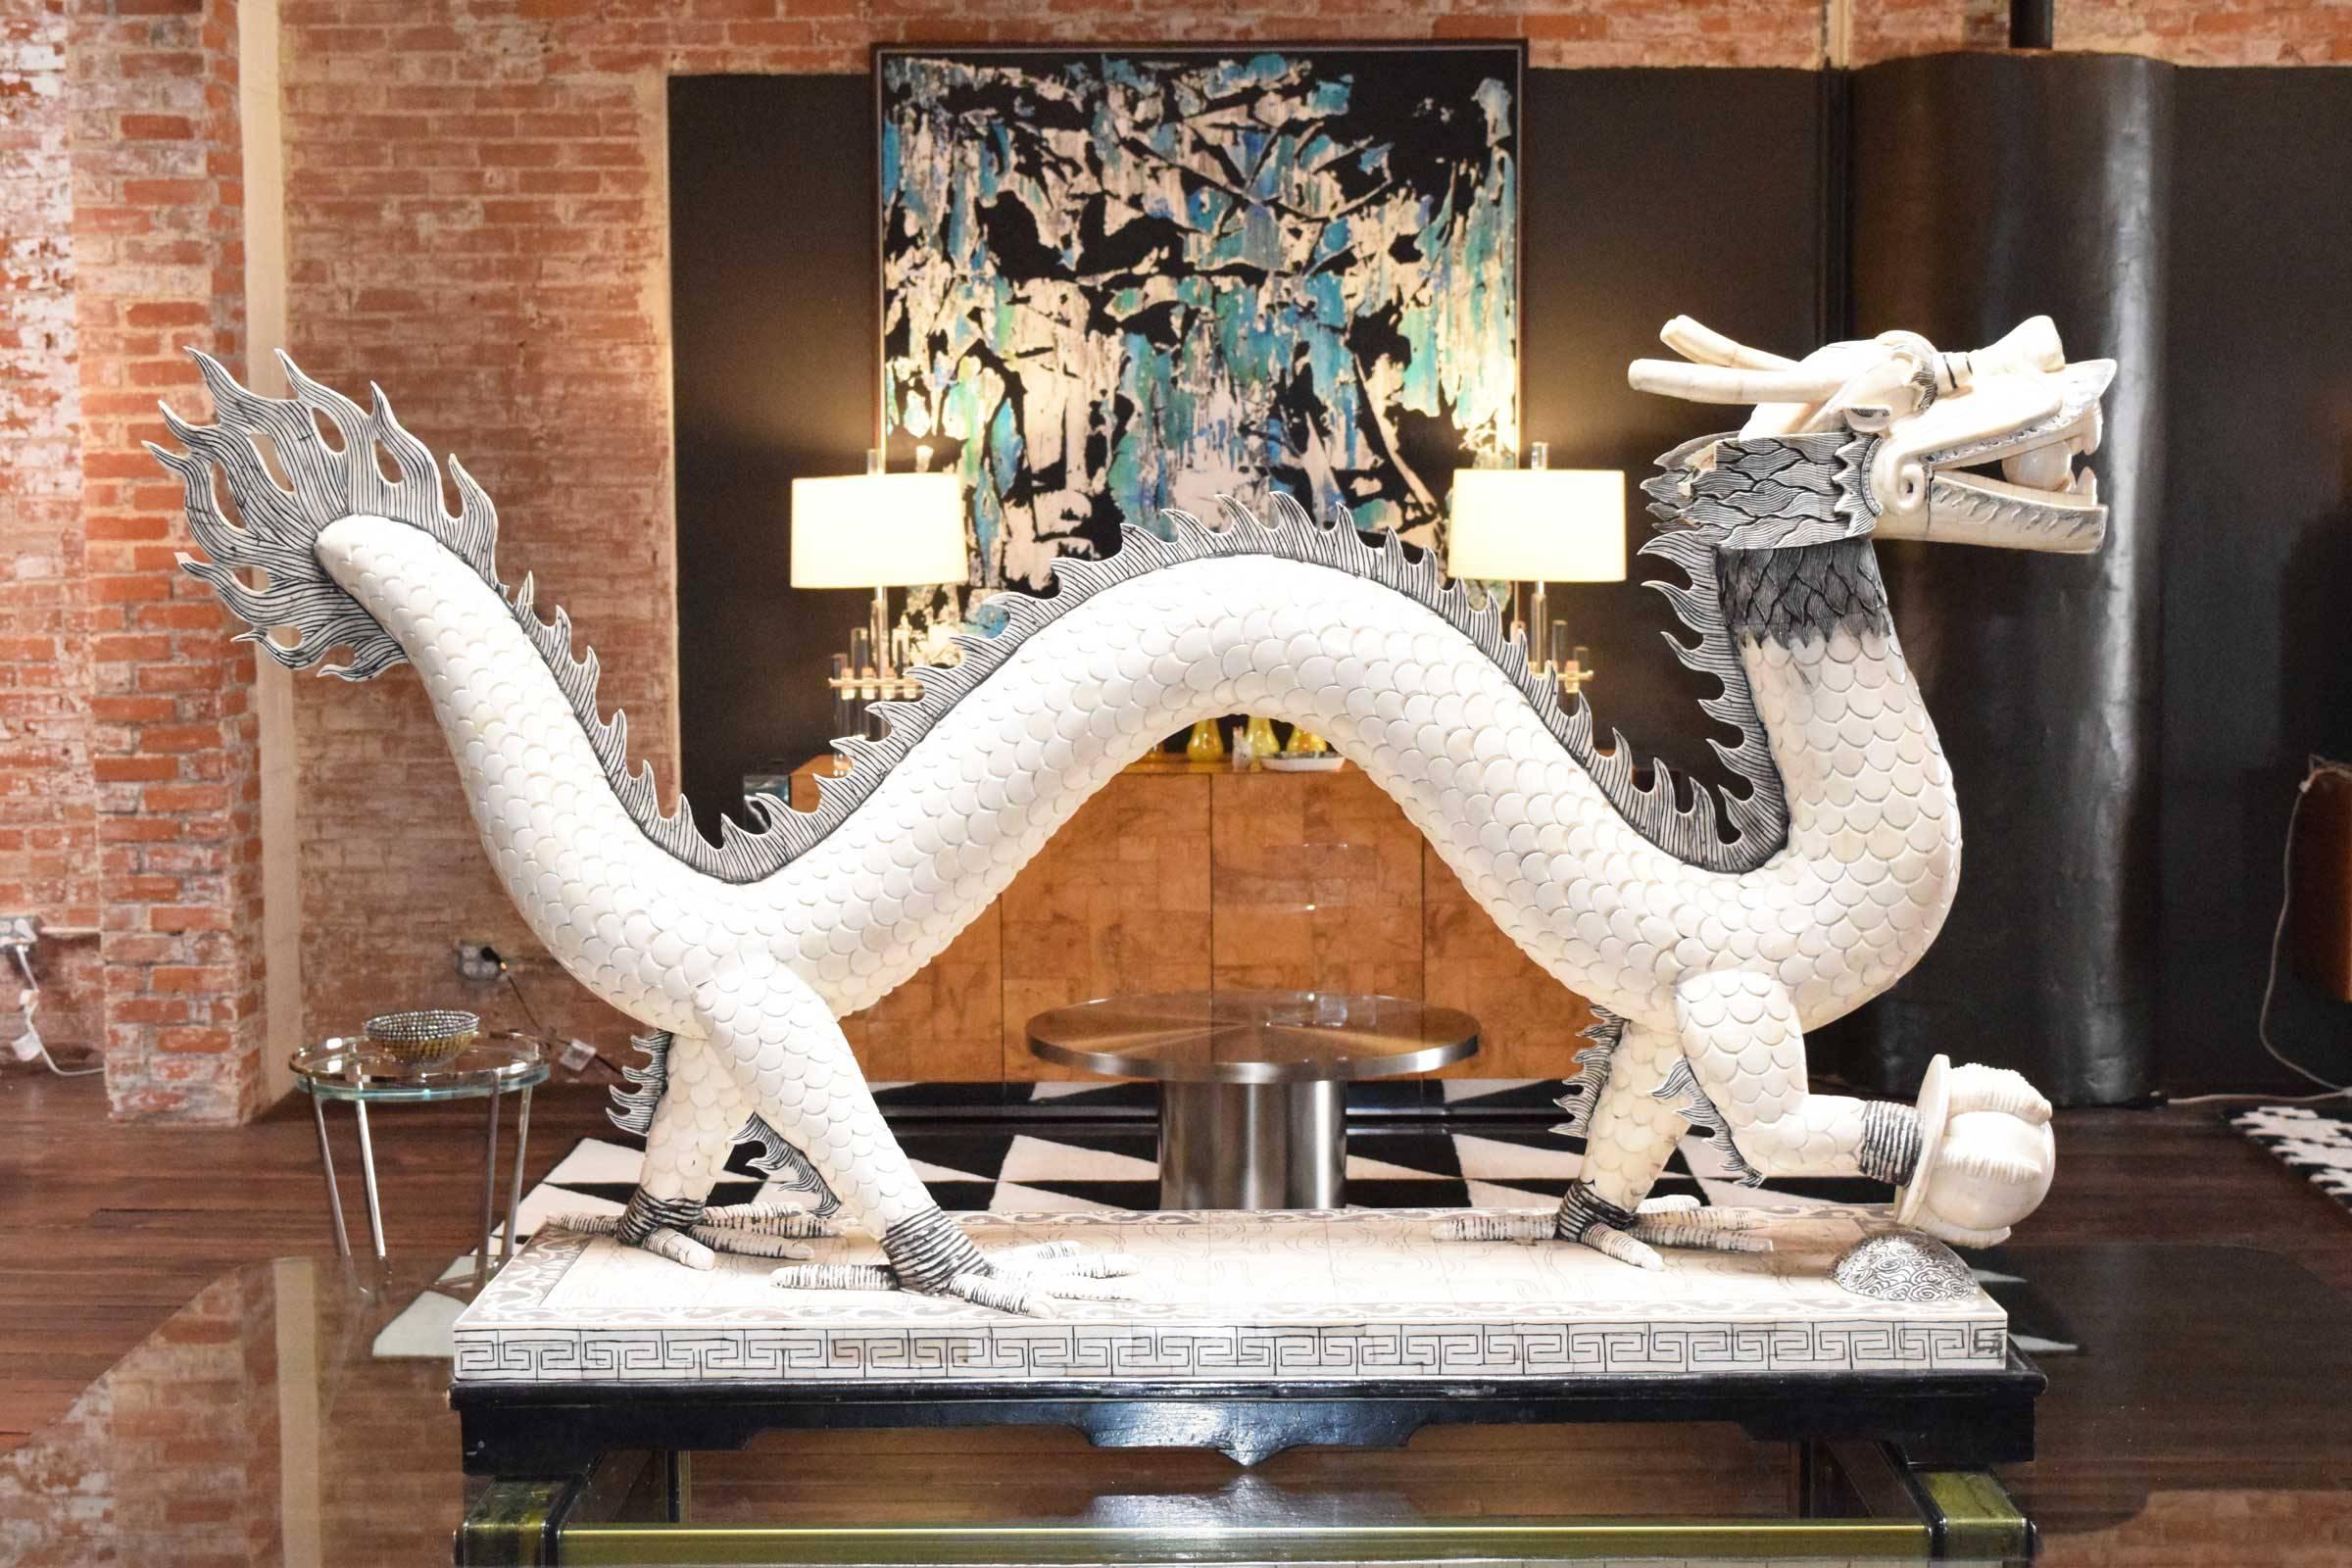 Over 5 feet long and 3 feet high, this is a beautifully crafted dragon made of bone. This is a five claw dragon with horns. The details are very ornate. Dragon's foot is holding a pearl and there is a ball in his mouth. 

East Asian dragons are